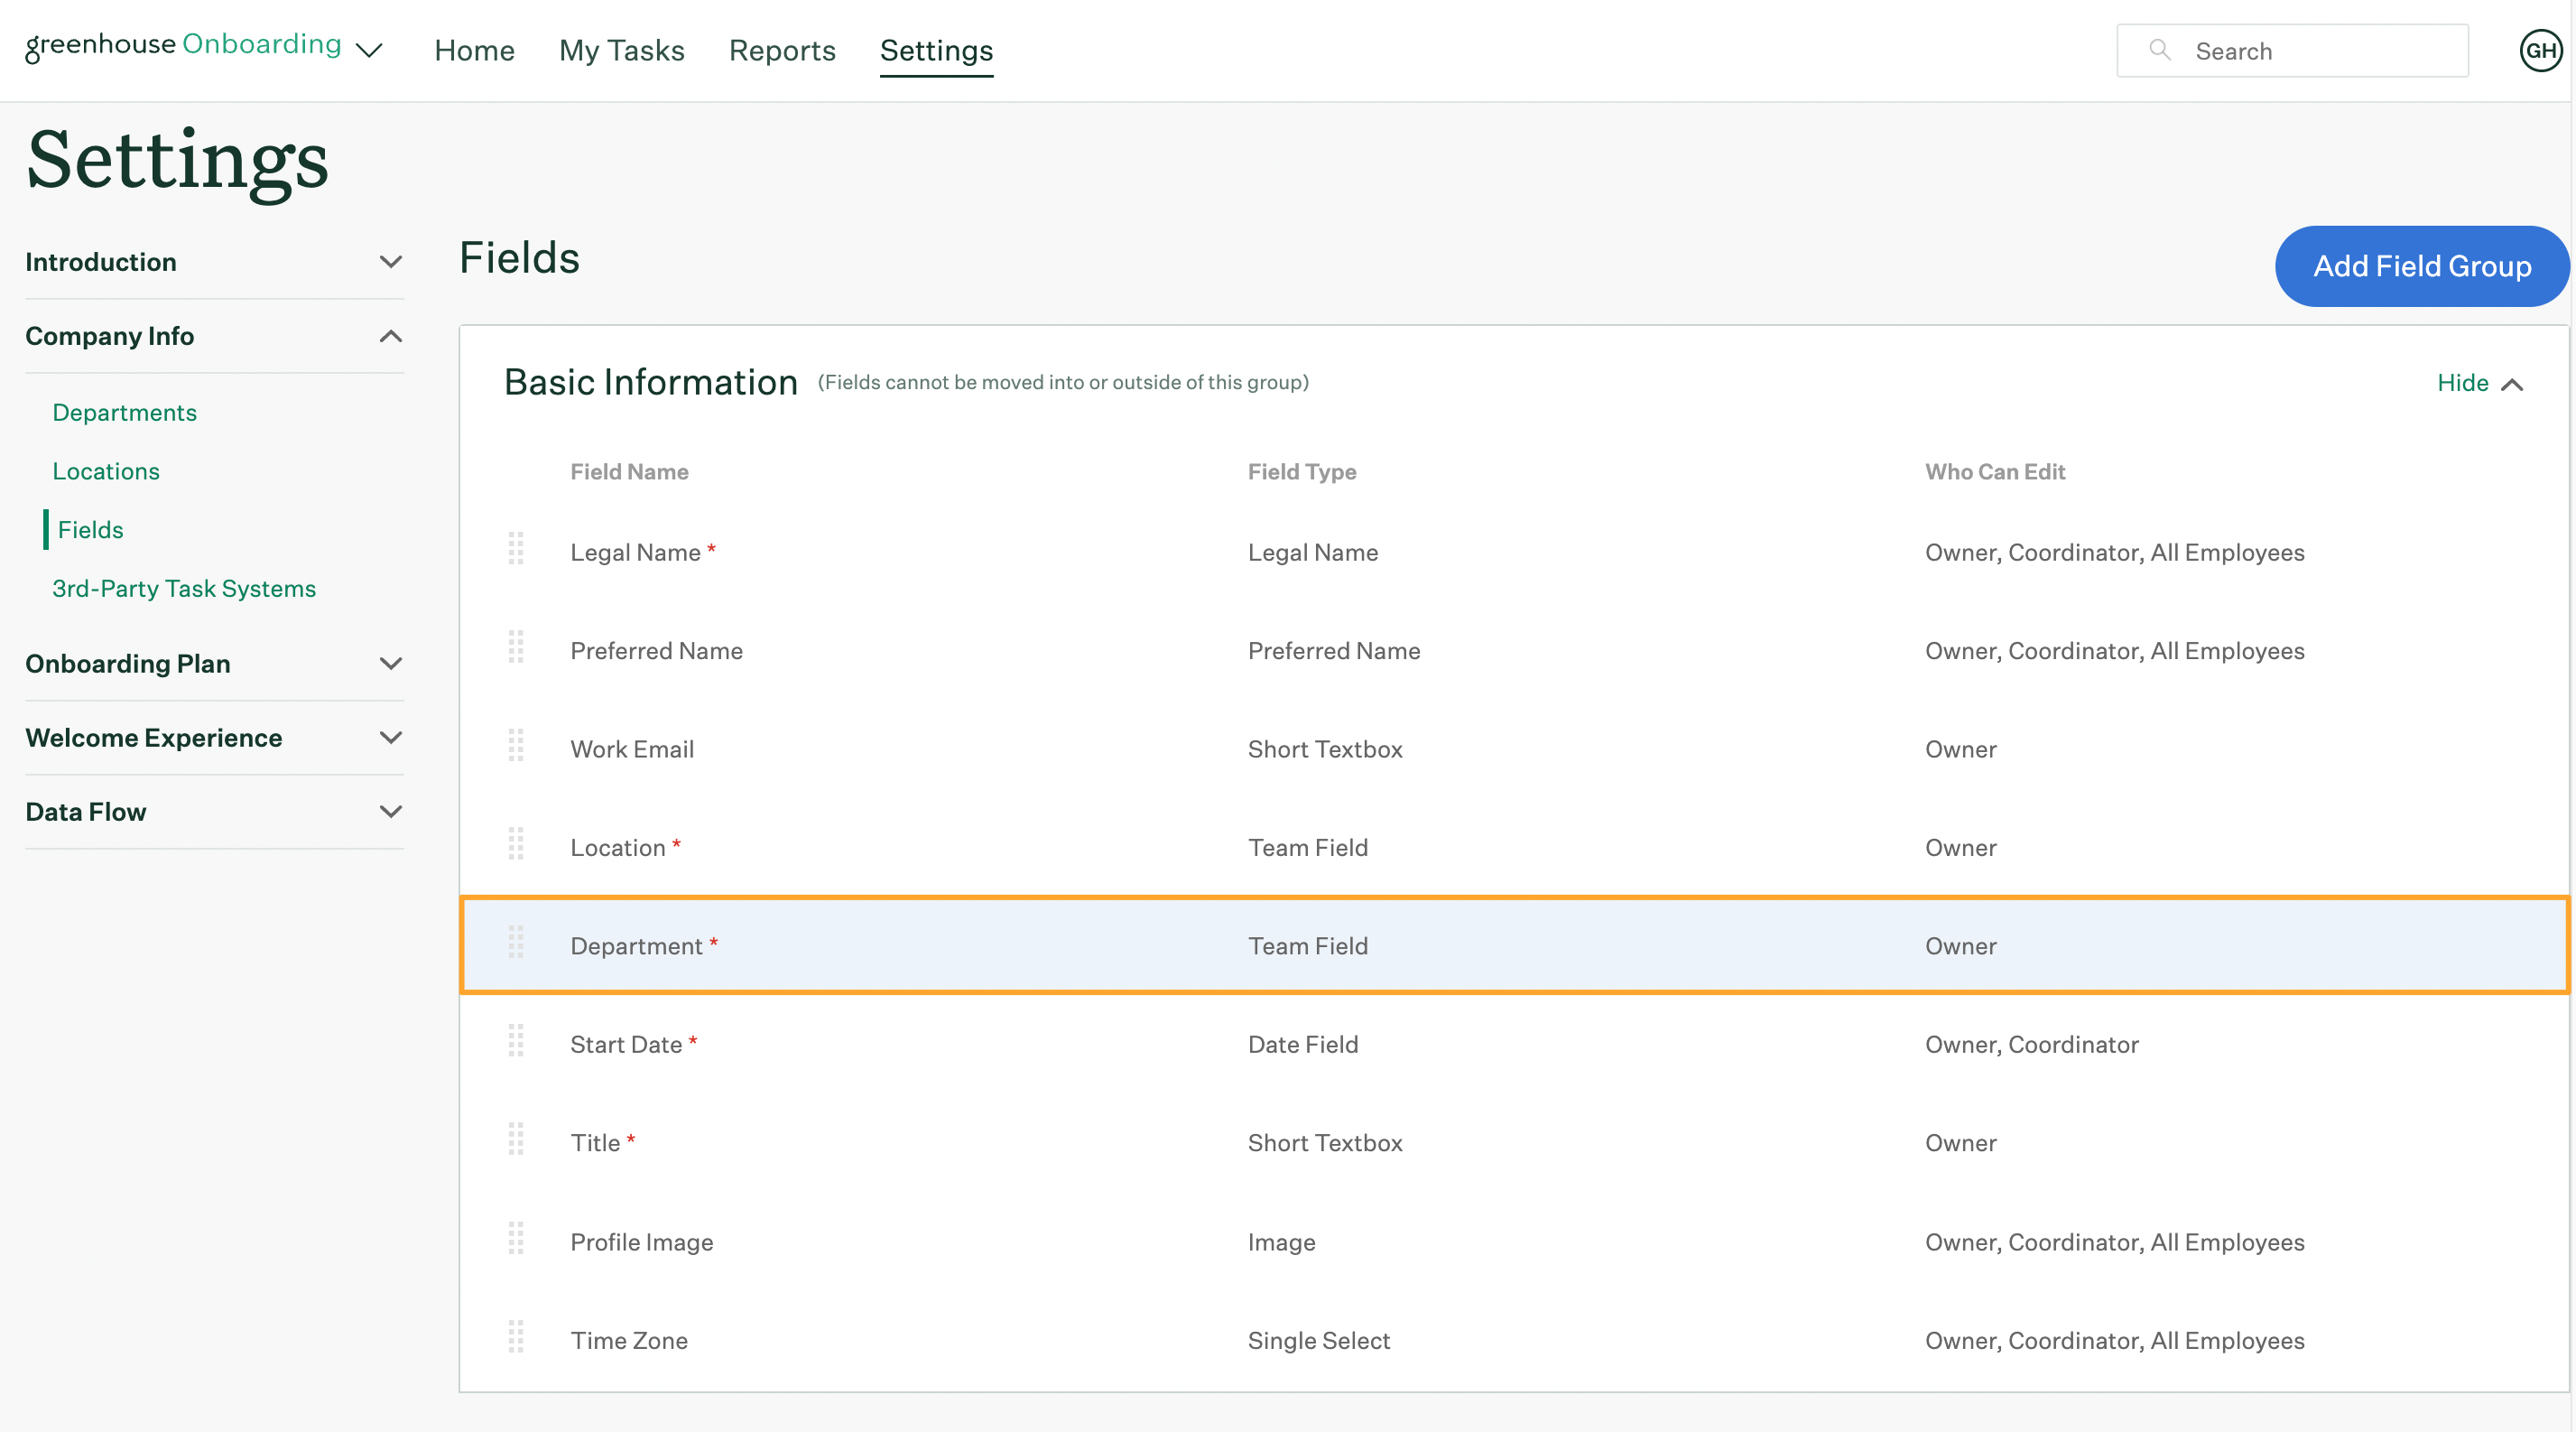 Fields page in Greenhouse Onboarding Settings with Department field highlighted